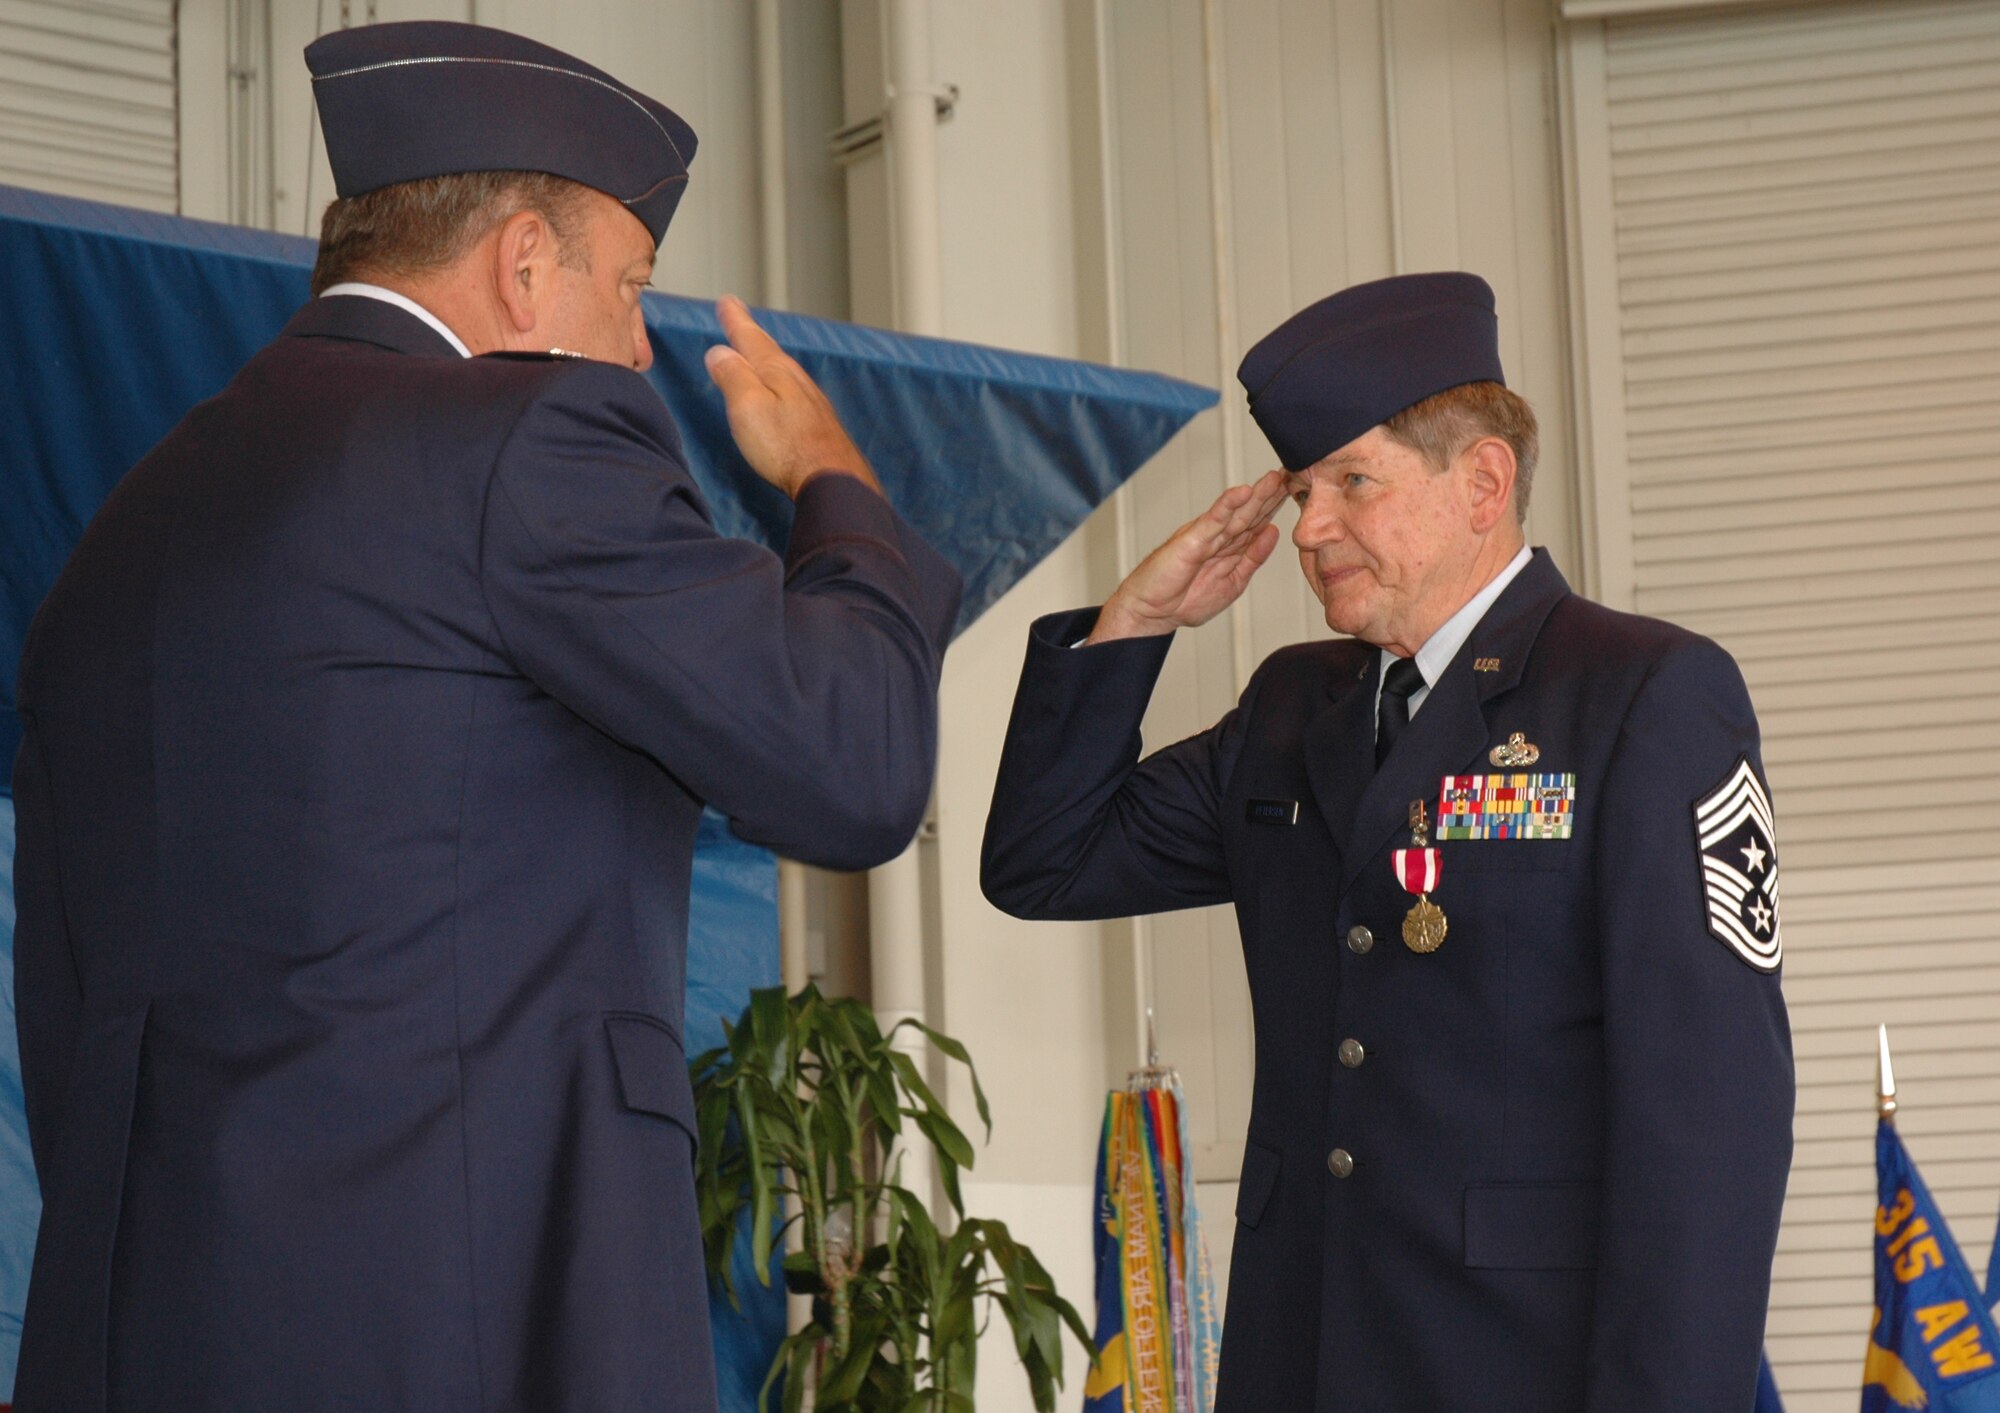 The 315th Airlift Wing Command Chief Master Sgt. Michael Petersen gives Col. Gary Cook, 315th AW commander, a final salute during his award presentation and retirement ceremony.  Photo by 1st Lt. Wayne Capps, USAFR